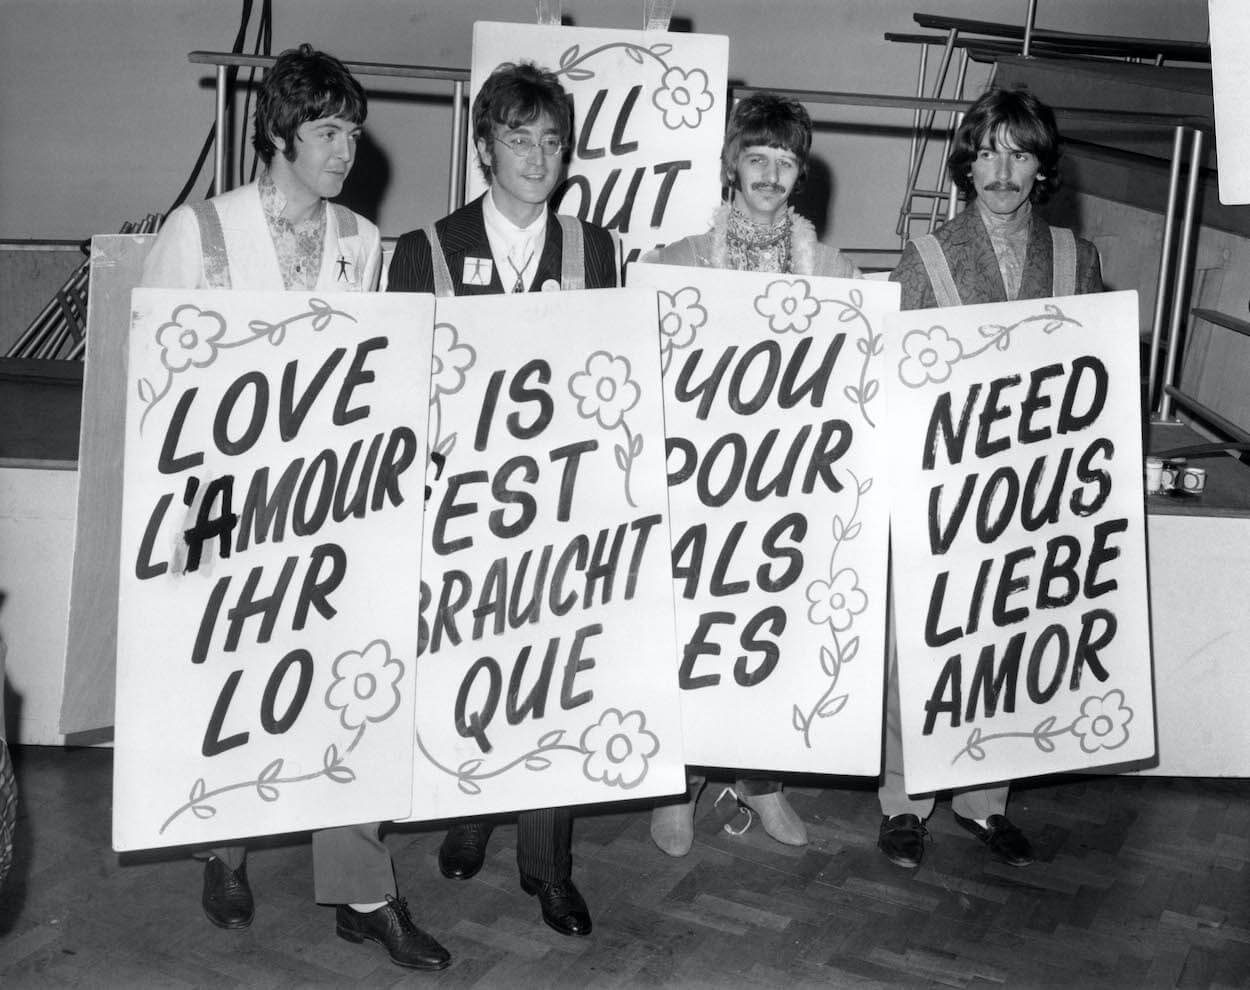 Beatles members (from left) Paul McCartney, John Lennon, Ringo Starr, and George Harrison wear sandwich boards while promoting the song 'All You Need Is Love.'